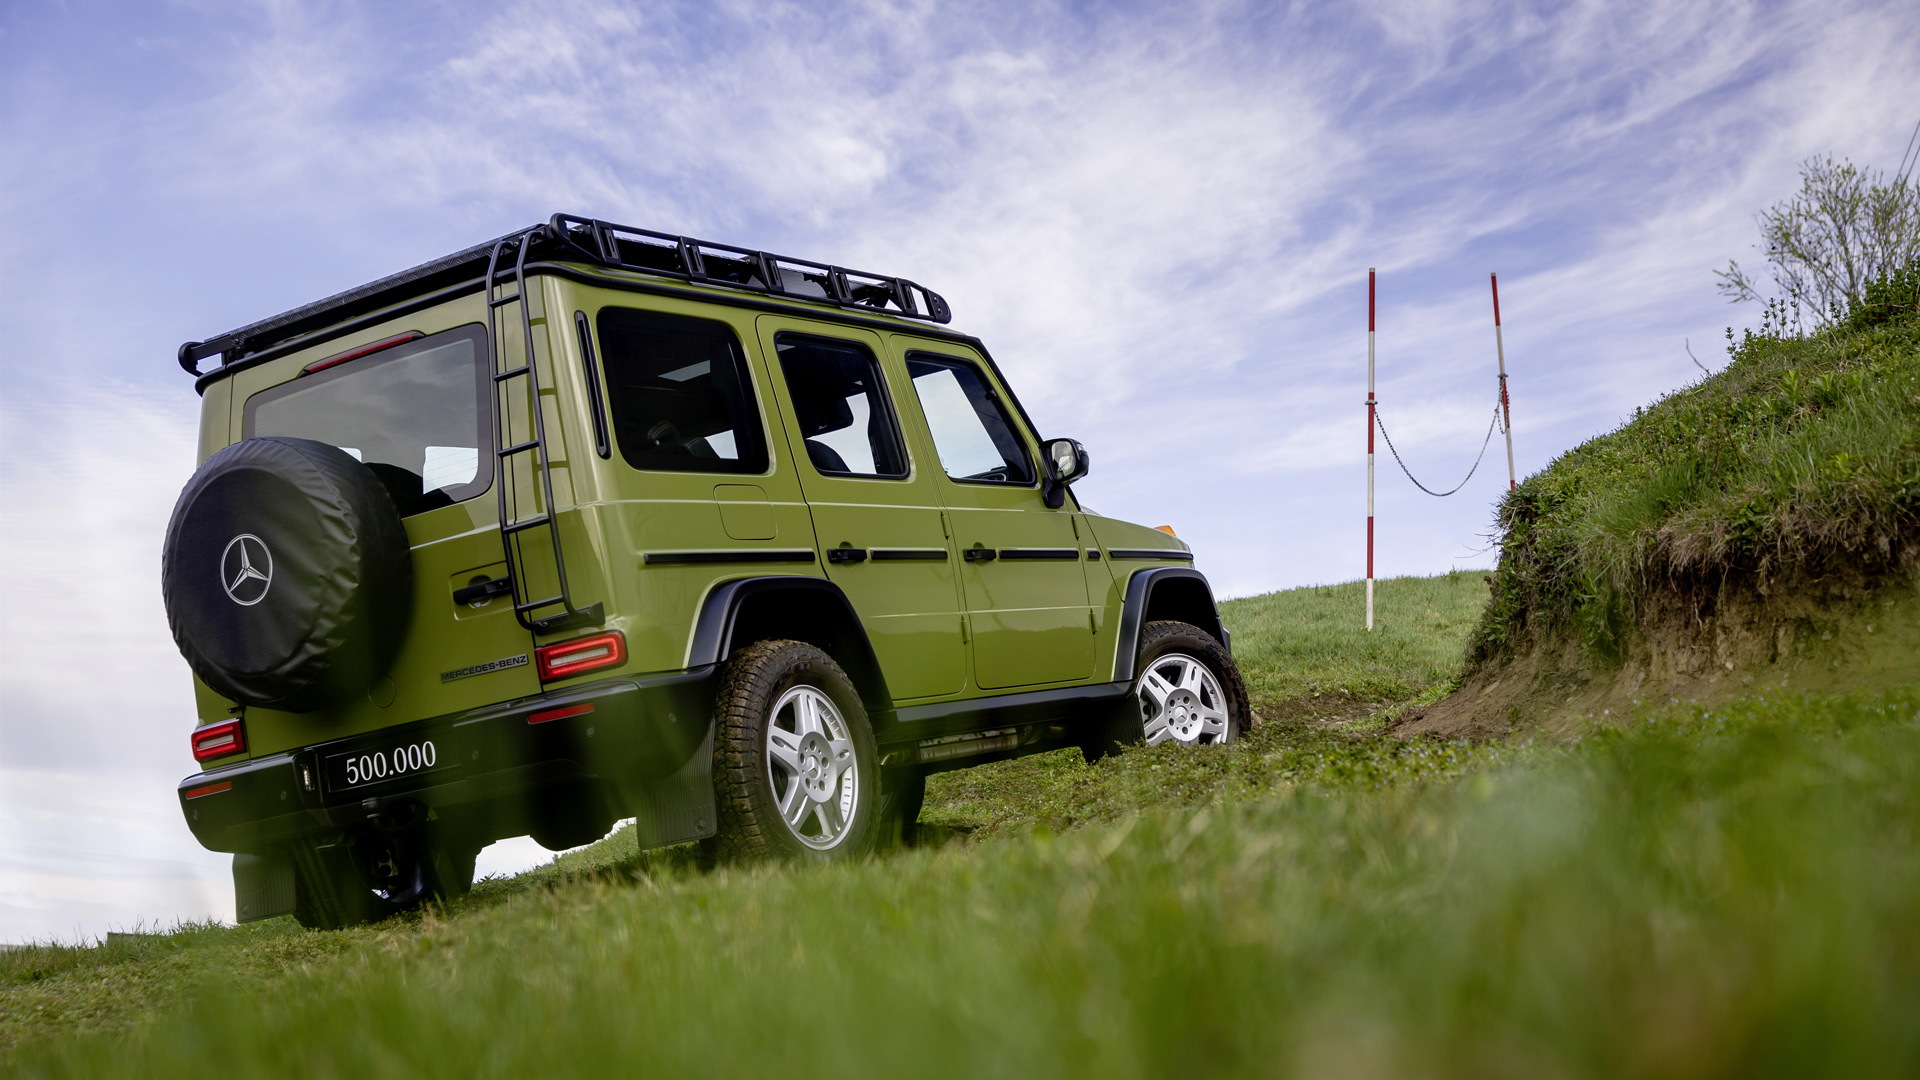 500,000th Mercedes-Benz G-Class is completed - April, 2023